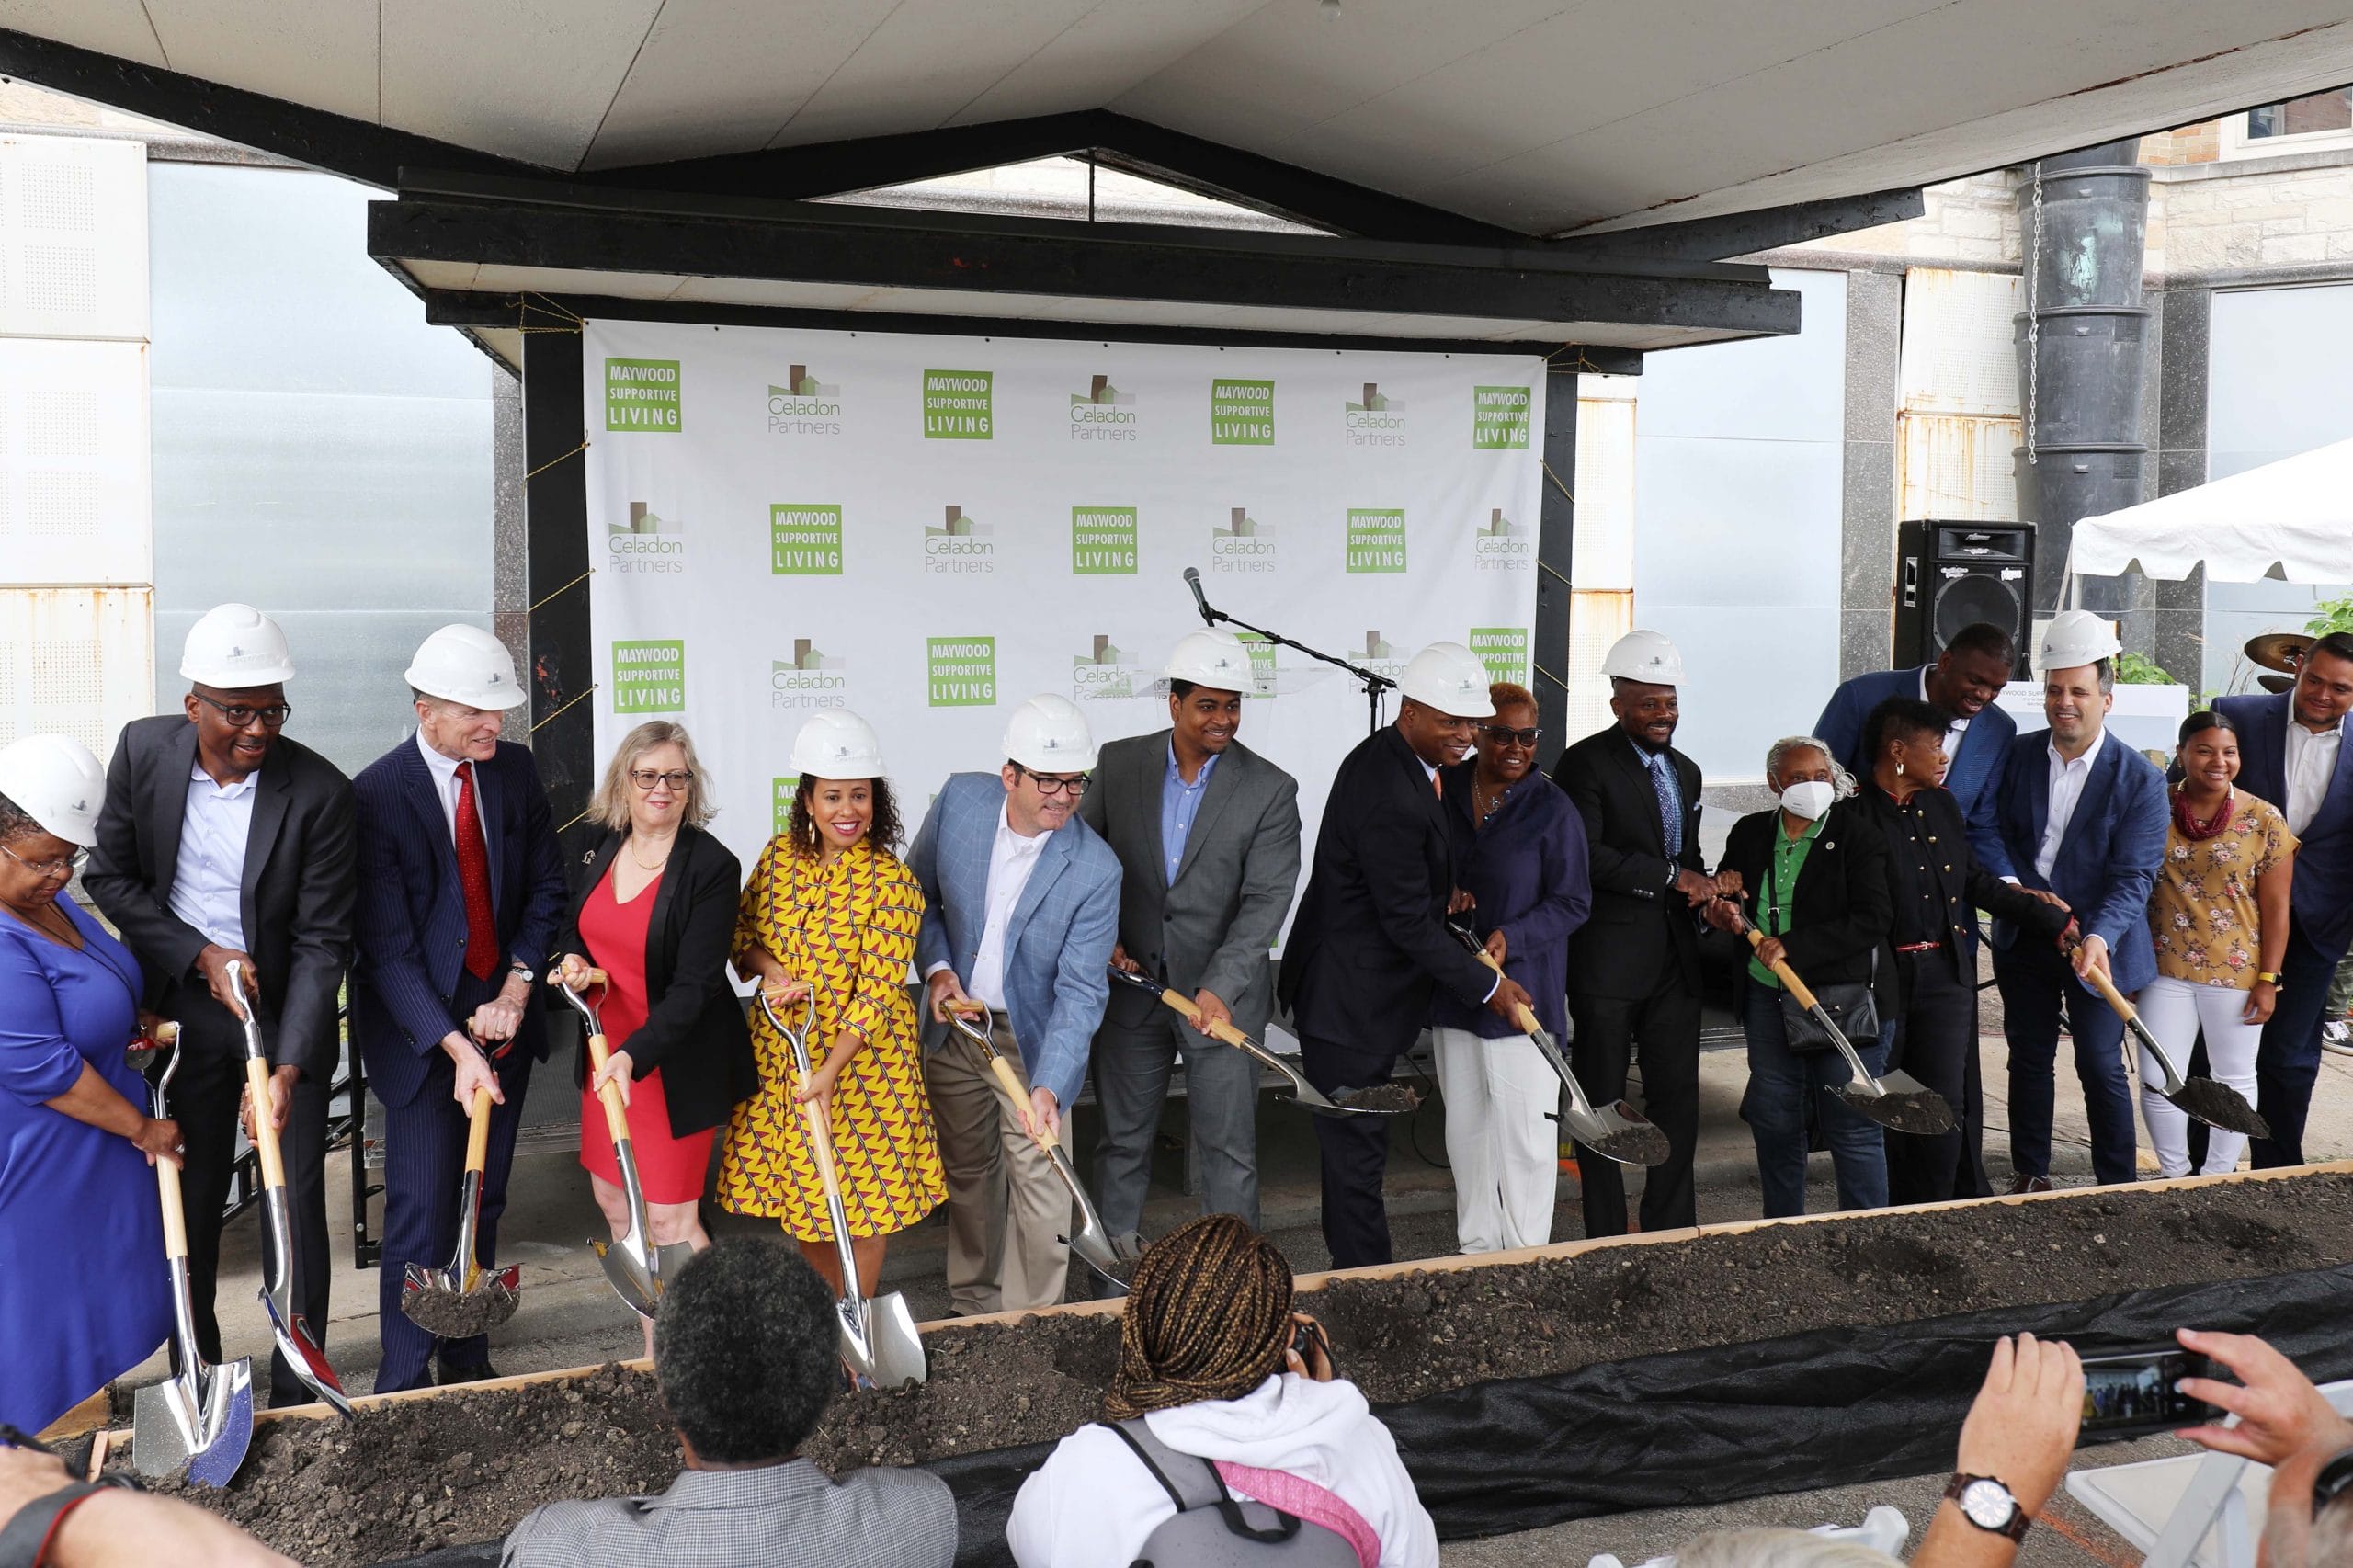 Skender Breaks Ground on 133,000-Square-Foot Maywood Supportive Living Redevelopment Project